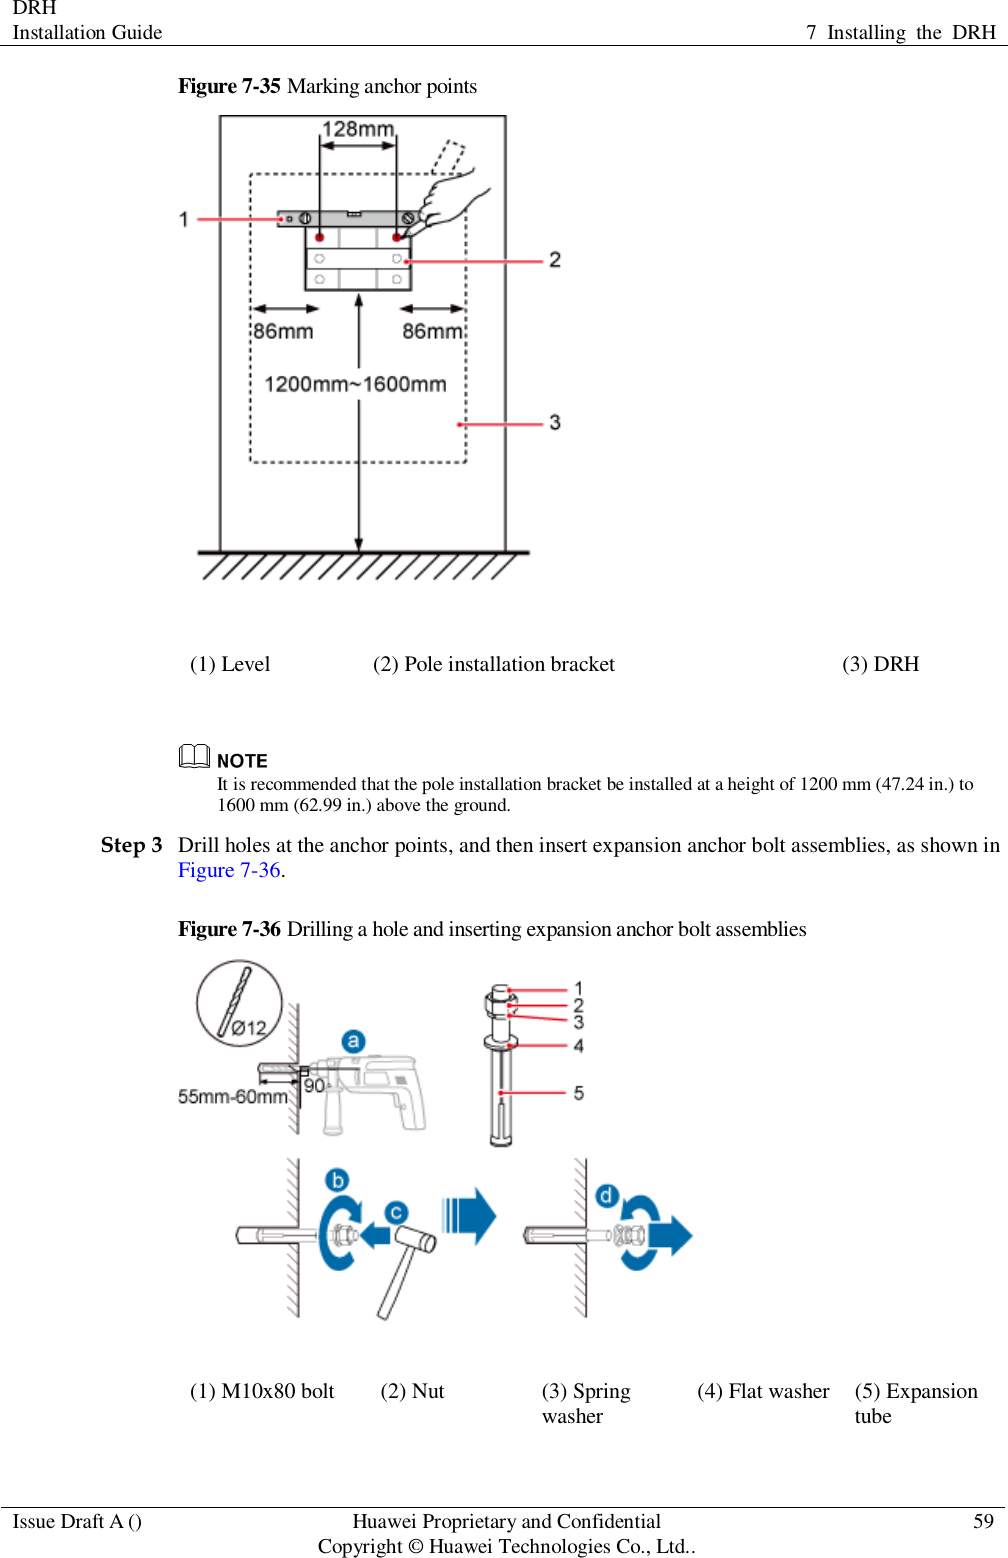 DRH   Installation Guide 7  Installing  the  DRH  Issue Draft A () Huawei Proprietary and Confidential                                     Copyright © Huawei Technologies Co., Ltd.. 59  Figure 7-35 Marking anchor points  (1) Level (2) Pole installation bracket (3) DRH   It is recommended that the pole installation bracket be installed at a height of 1200 mm (47.24 in.) to 1600 mm (62.99 in.) above the ground. Step 3 Drill holes at the anchor points, and then insert expansion anchor bolt assemblies, as shown in Figure 7-36. Figure 7-36 Drilling a hole and inserting expansion anchor bolt assemblies  (1) M10x80 bolt (2) Nut (3) Spring washer (4) Flat washer (5) Expansion tube 